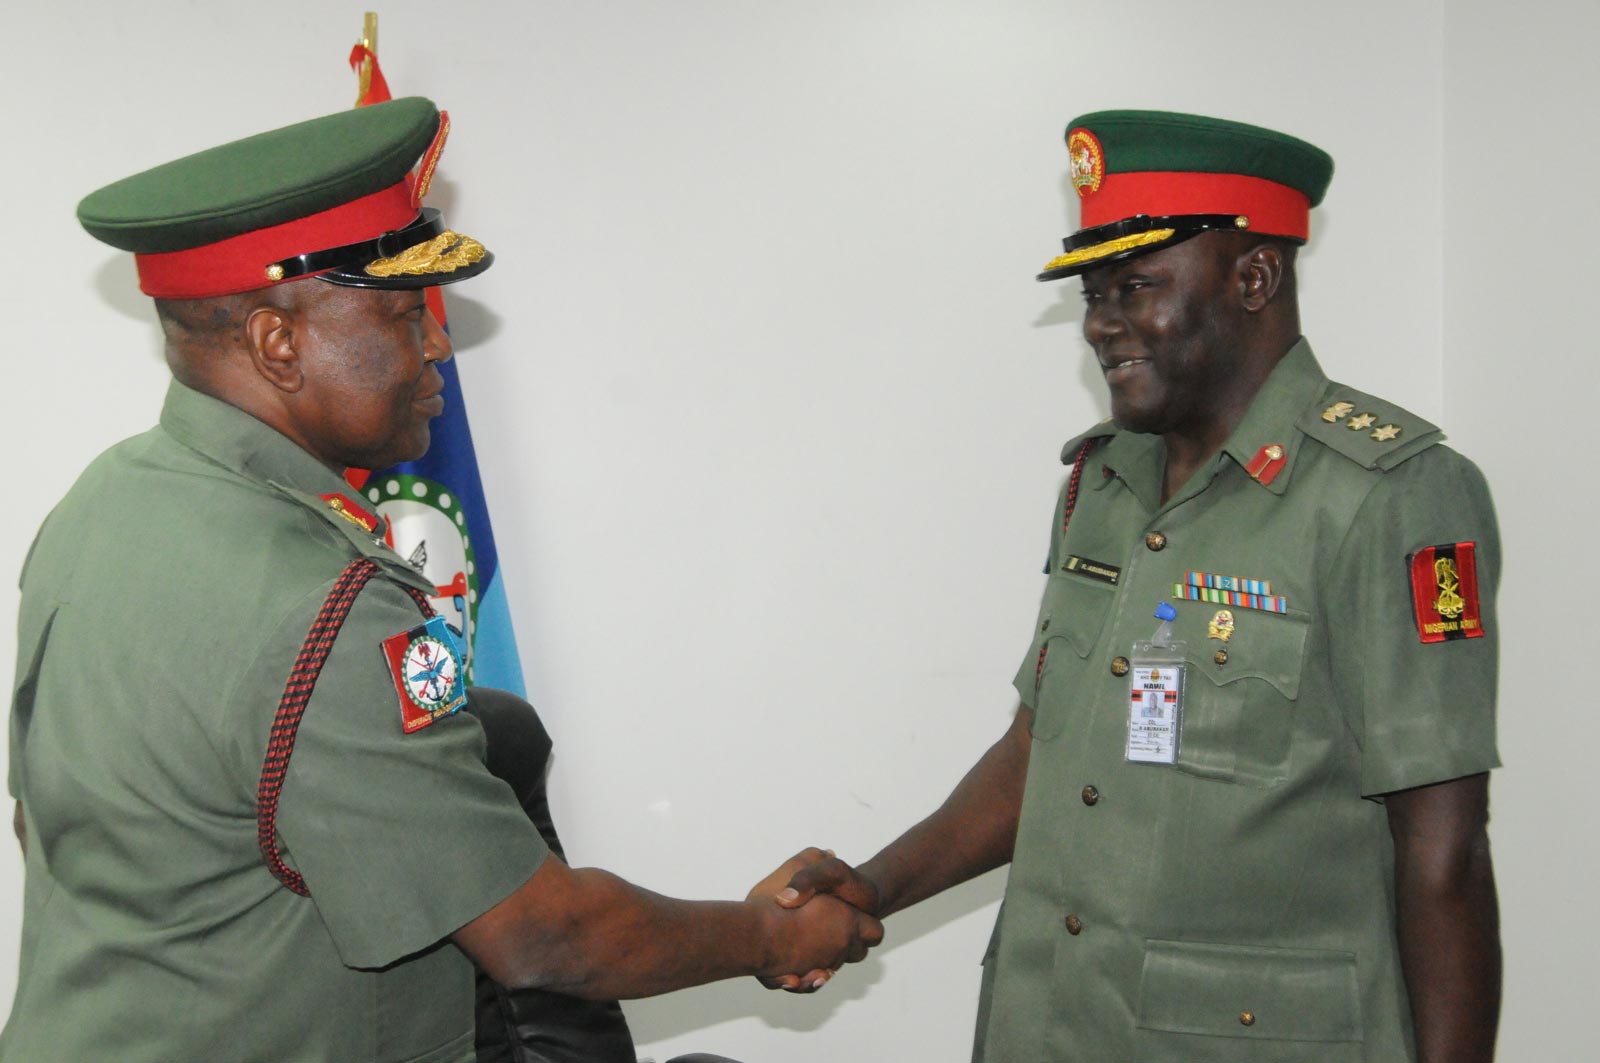 The spokesman of the Nigeria Defence Headquarters, Maj. Gen. Chris Olukolade, on Tuesday, June 30, 2015 launched two books at the Nigeria Air Force Conference Centre.